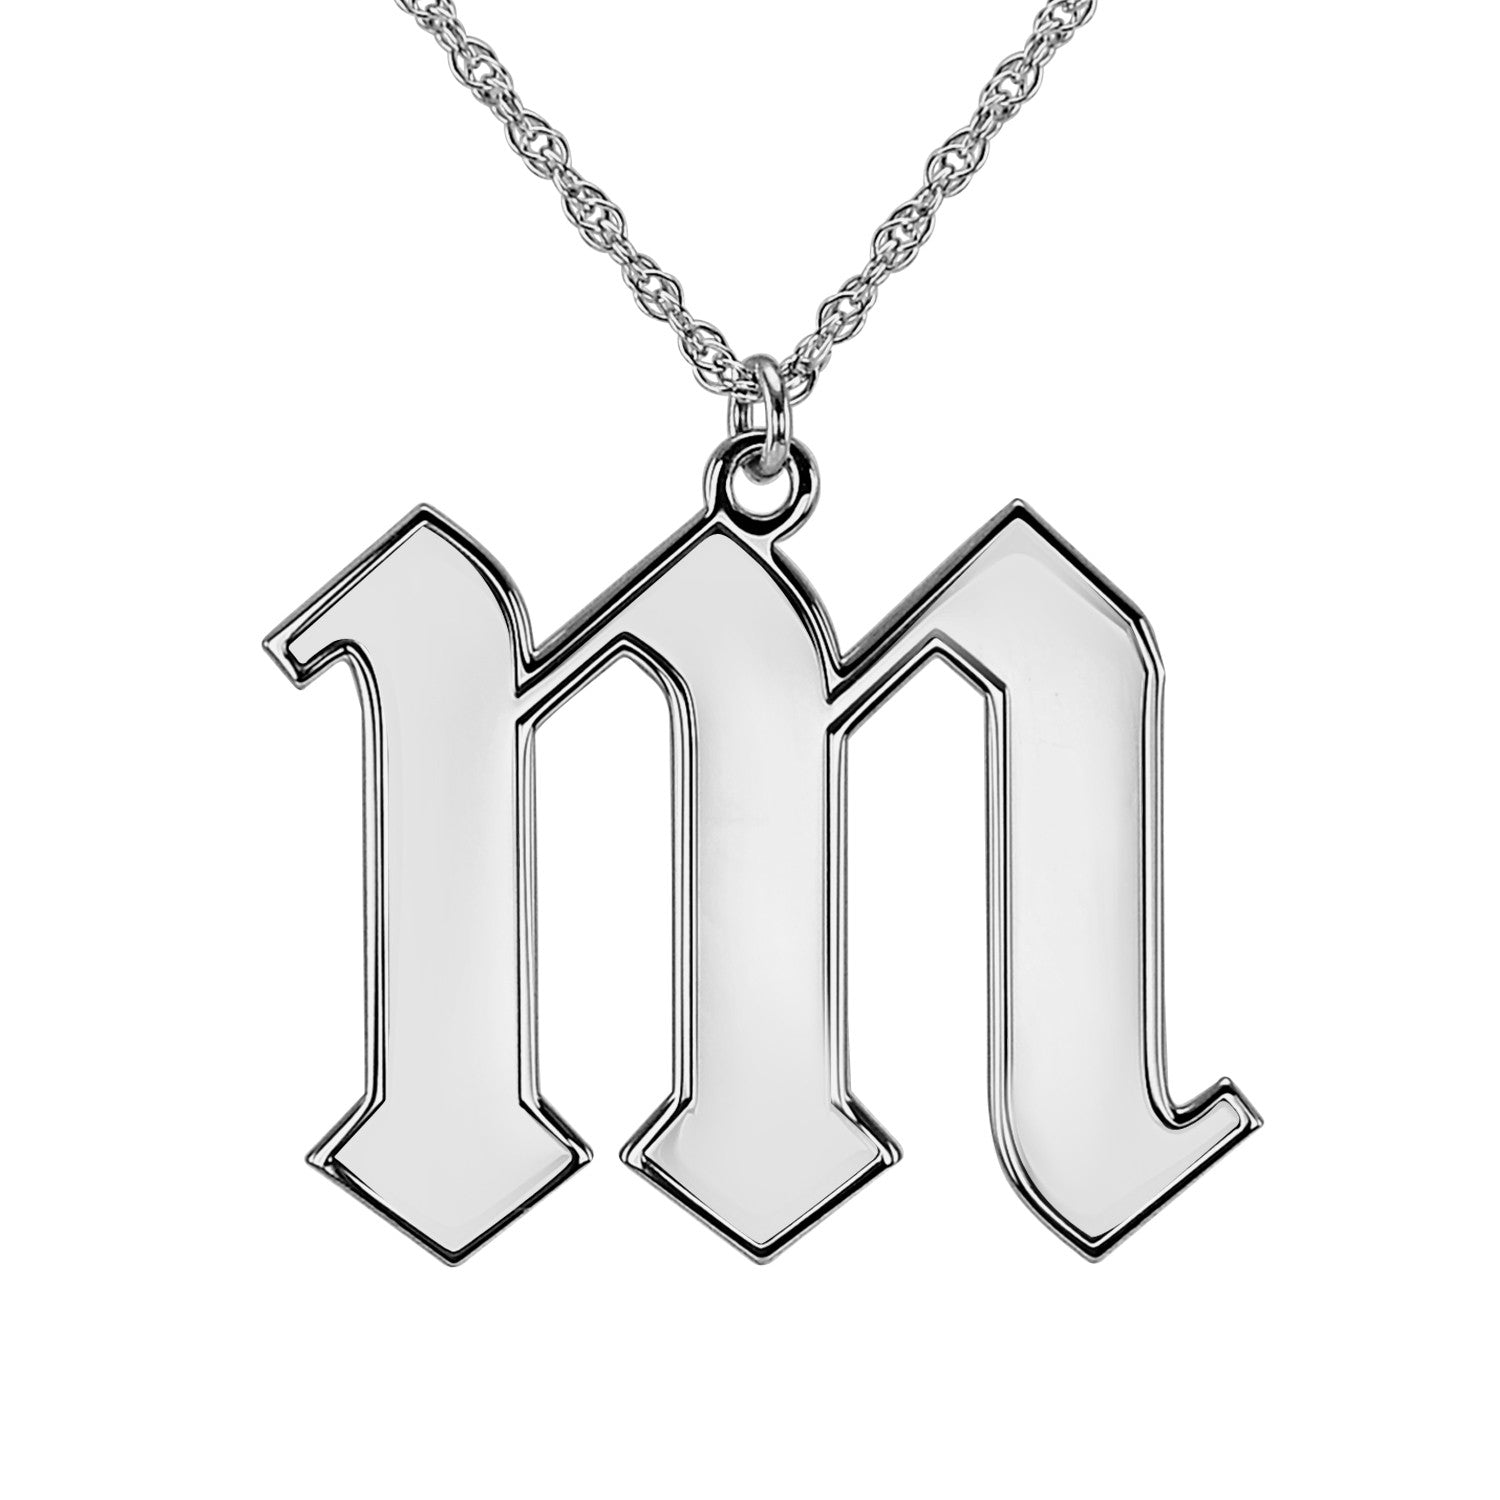 Sterling Silver Men's Gothic Initial Pendant Necklace - A | Jewlr